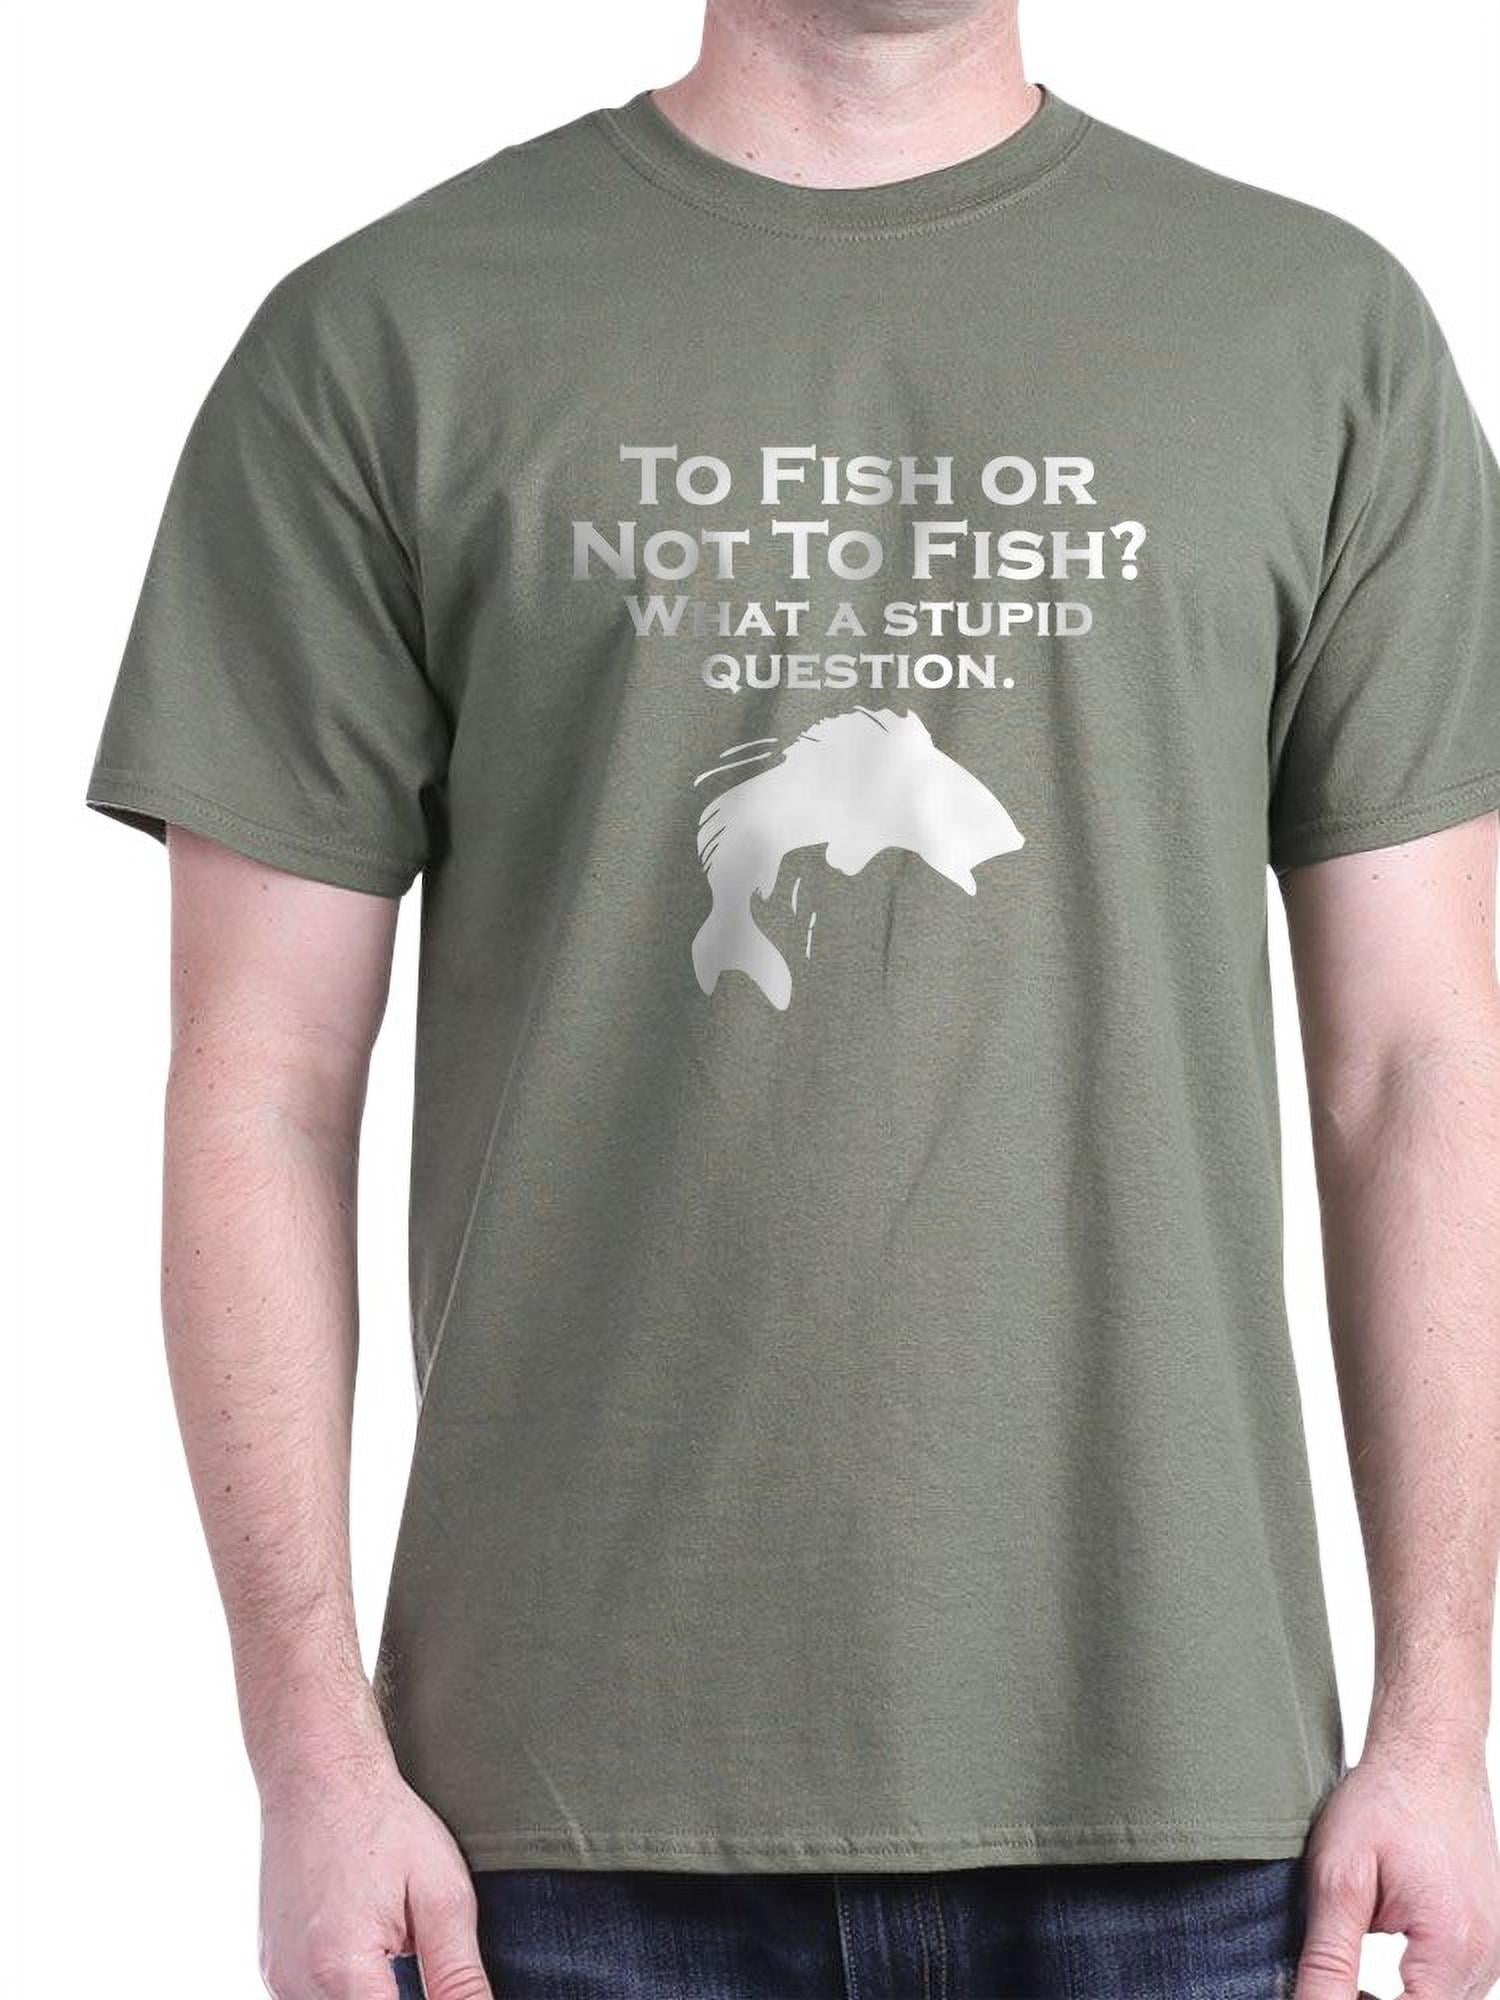 To Fish Or Not To Fish T-Shirt - 100% Cotton T-Shirt 